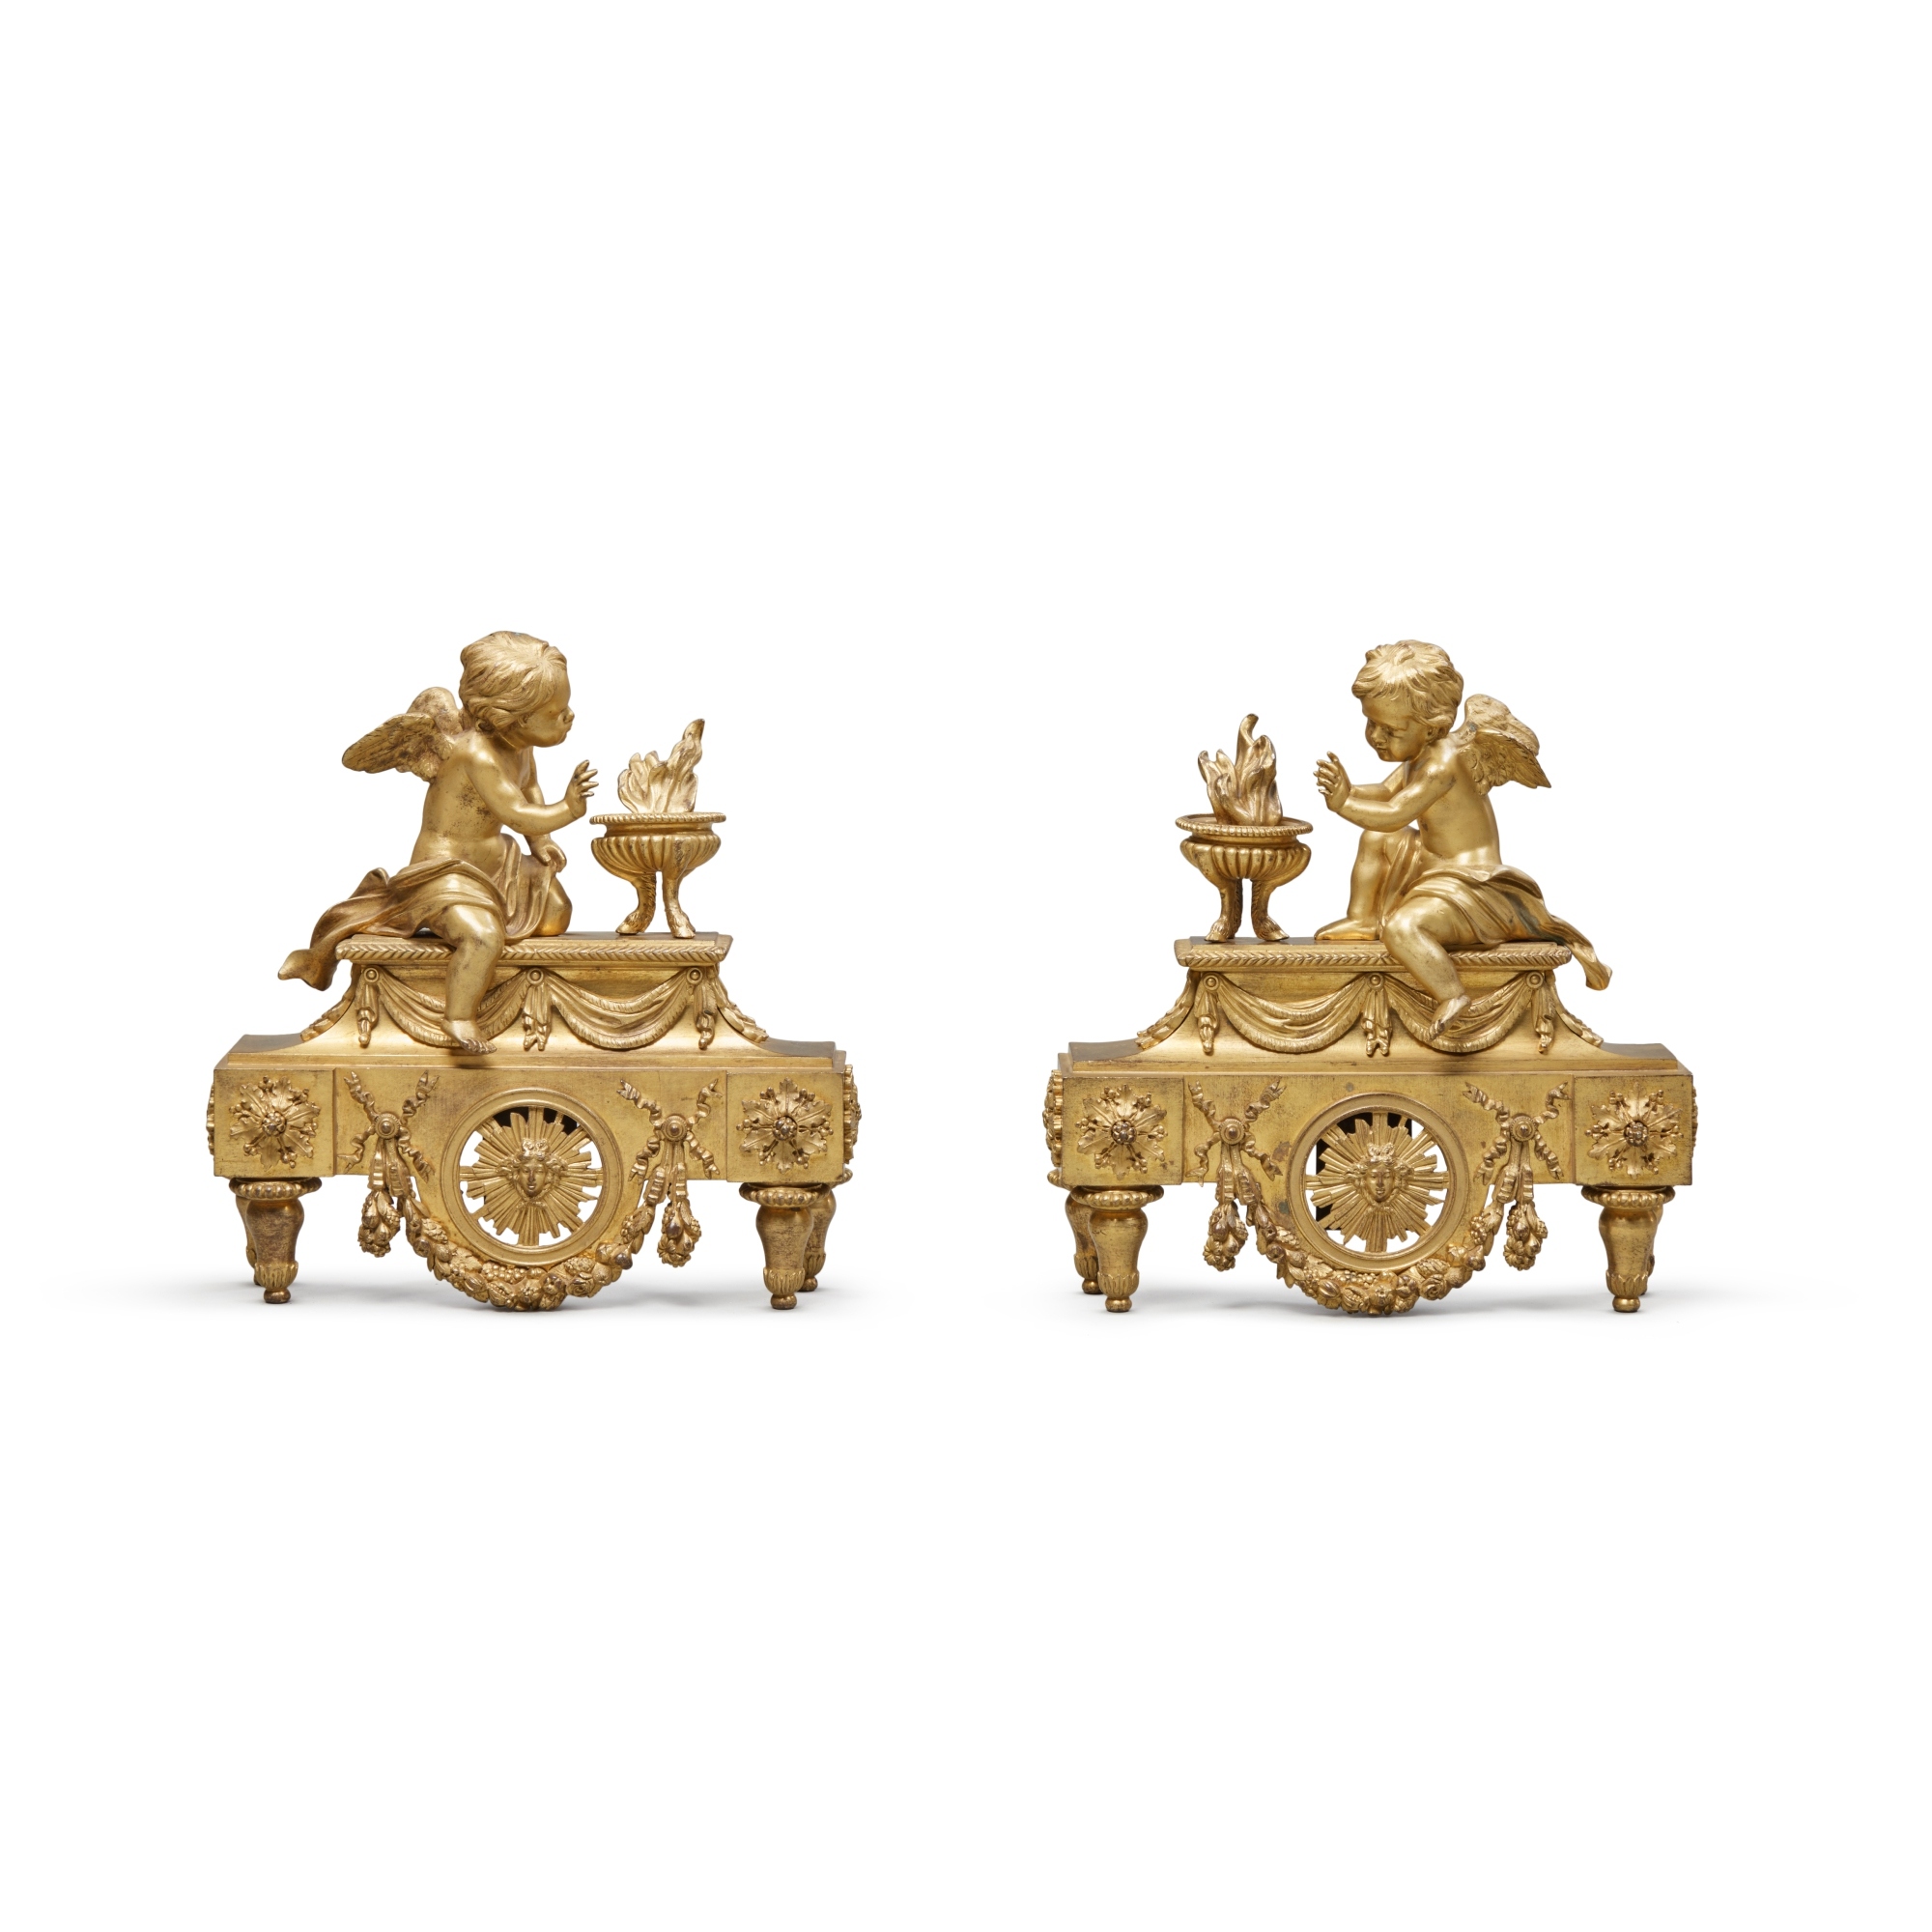 A Pair of Louis XVI Gilt Bronze Figural Chenets, Allegorical for Winter , Circa 1780 - Image 2 of 4